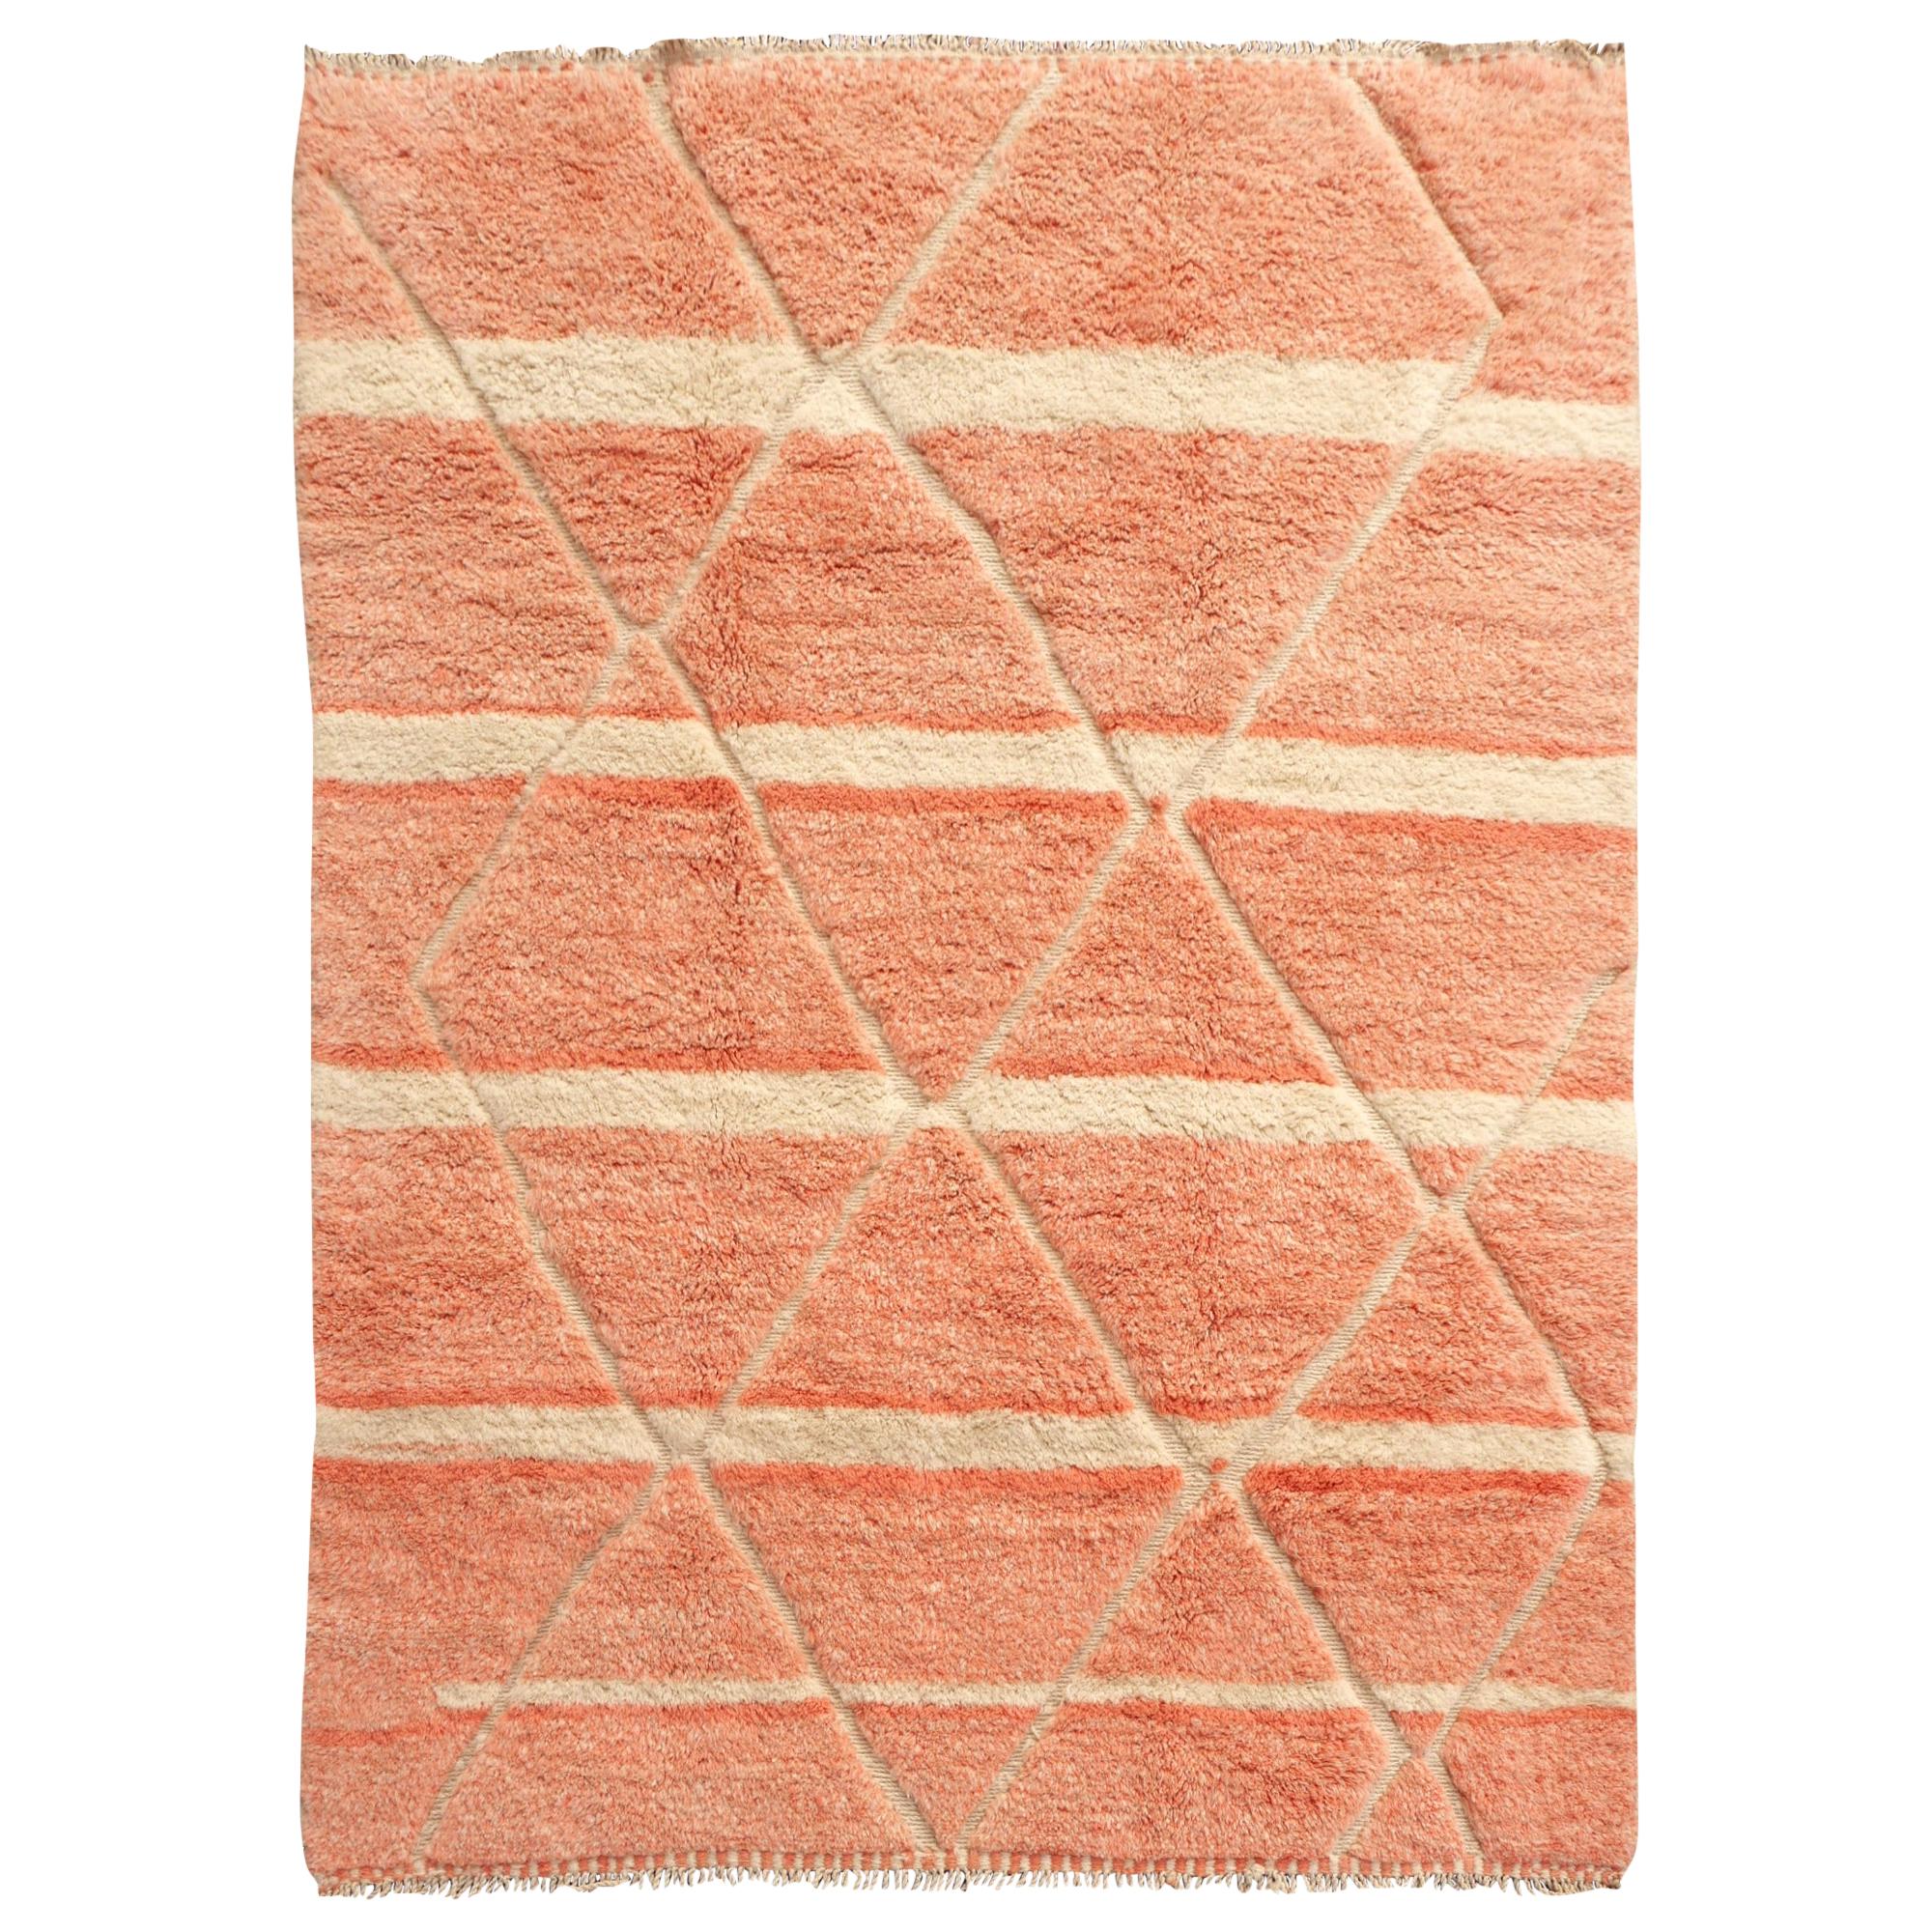 Moroccan Berber Rug Abstract Design Salmon Pink Woolwhite Stunning Quality